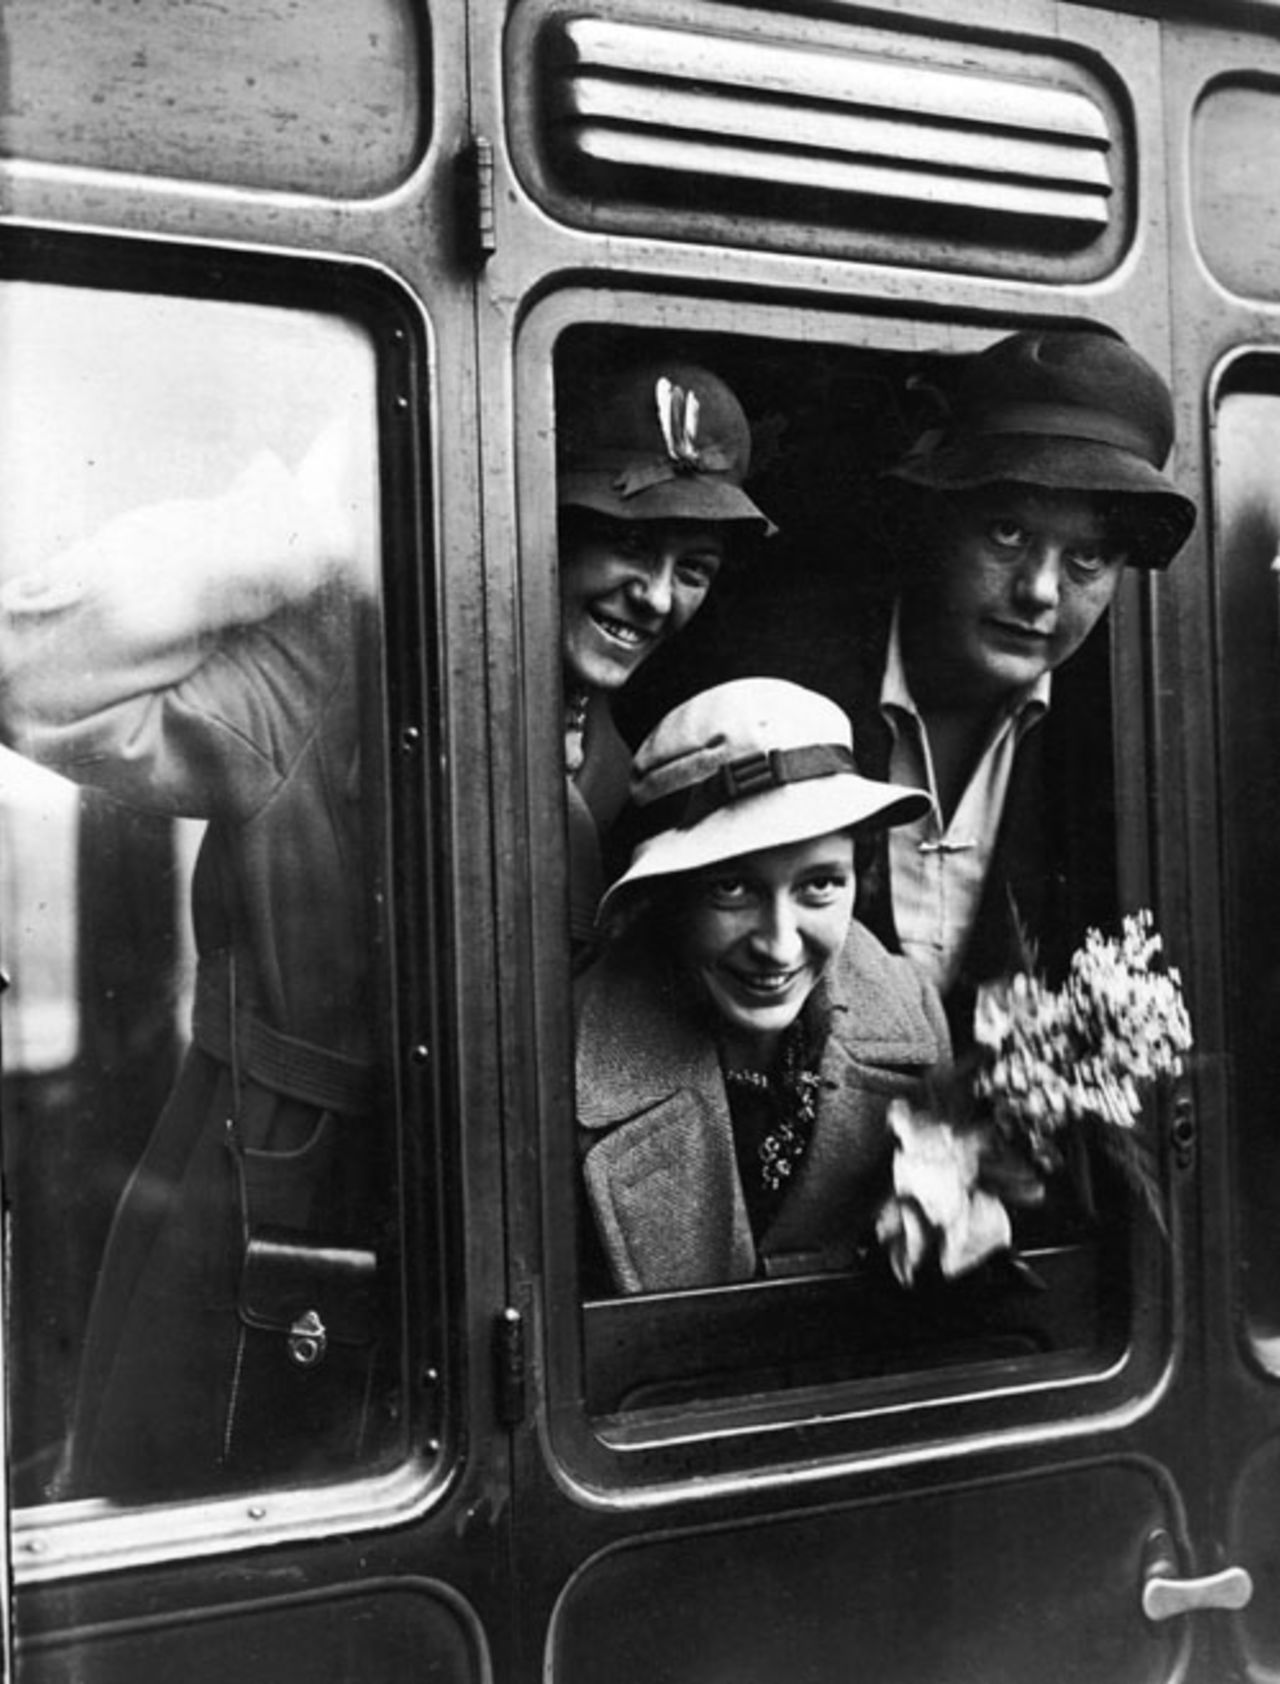 Captain Betty Archdale and two other members of the England women's team at London's St Pancras station en route for Australia, October 19, 1934